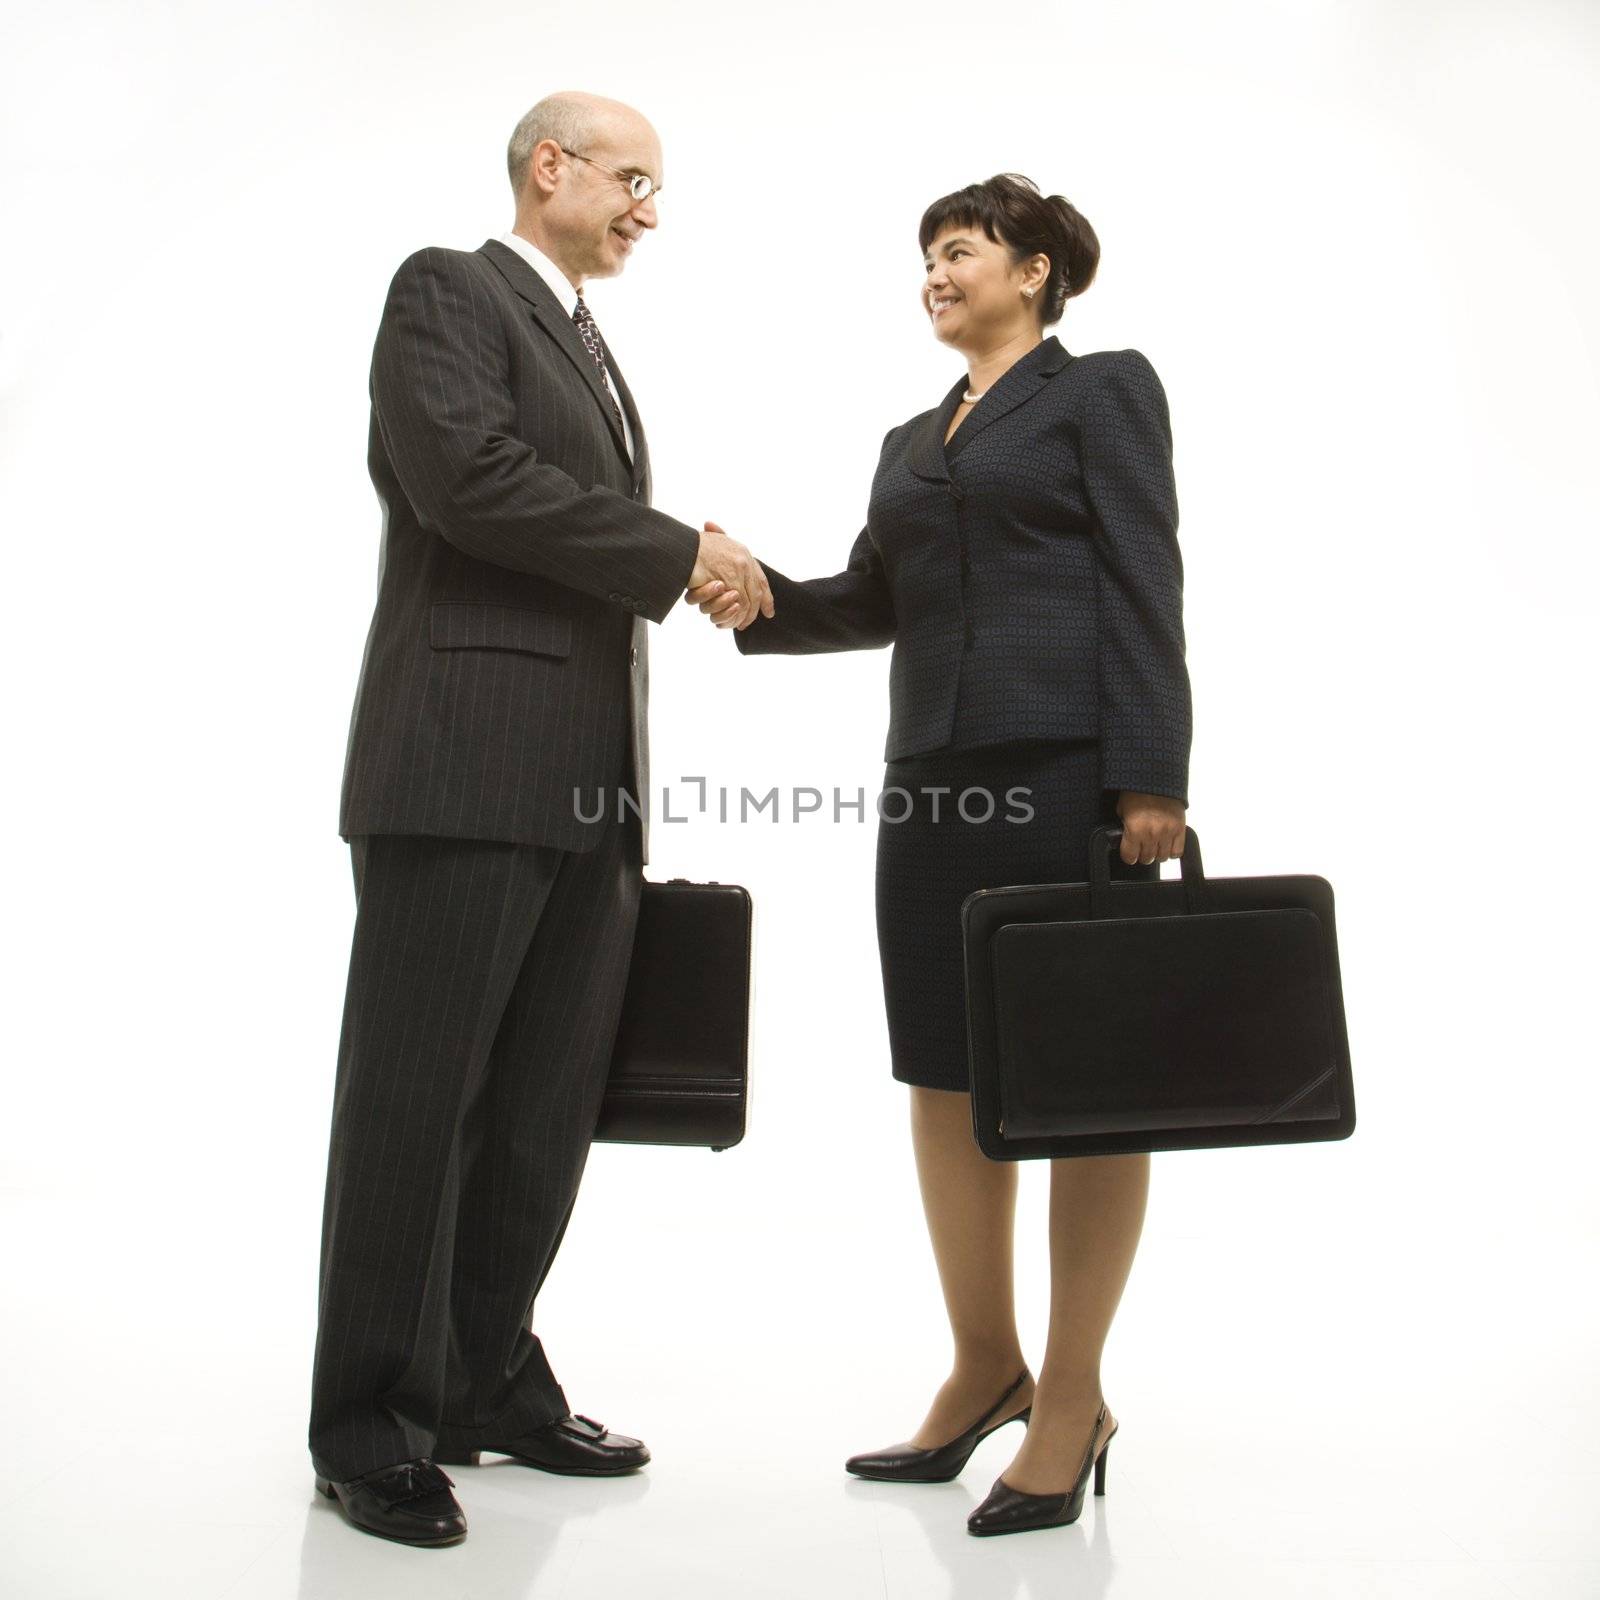 Caucasian middle-aged businessman and Filipino businesswoman standing looking at eachother shaking hands against white background.